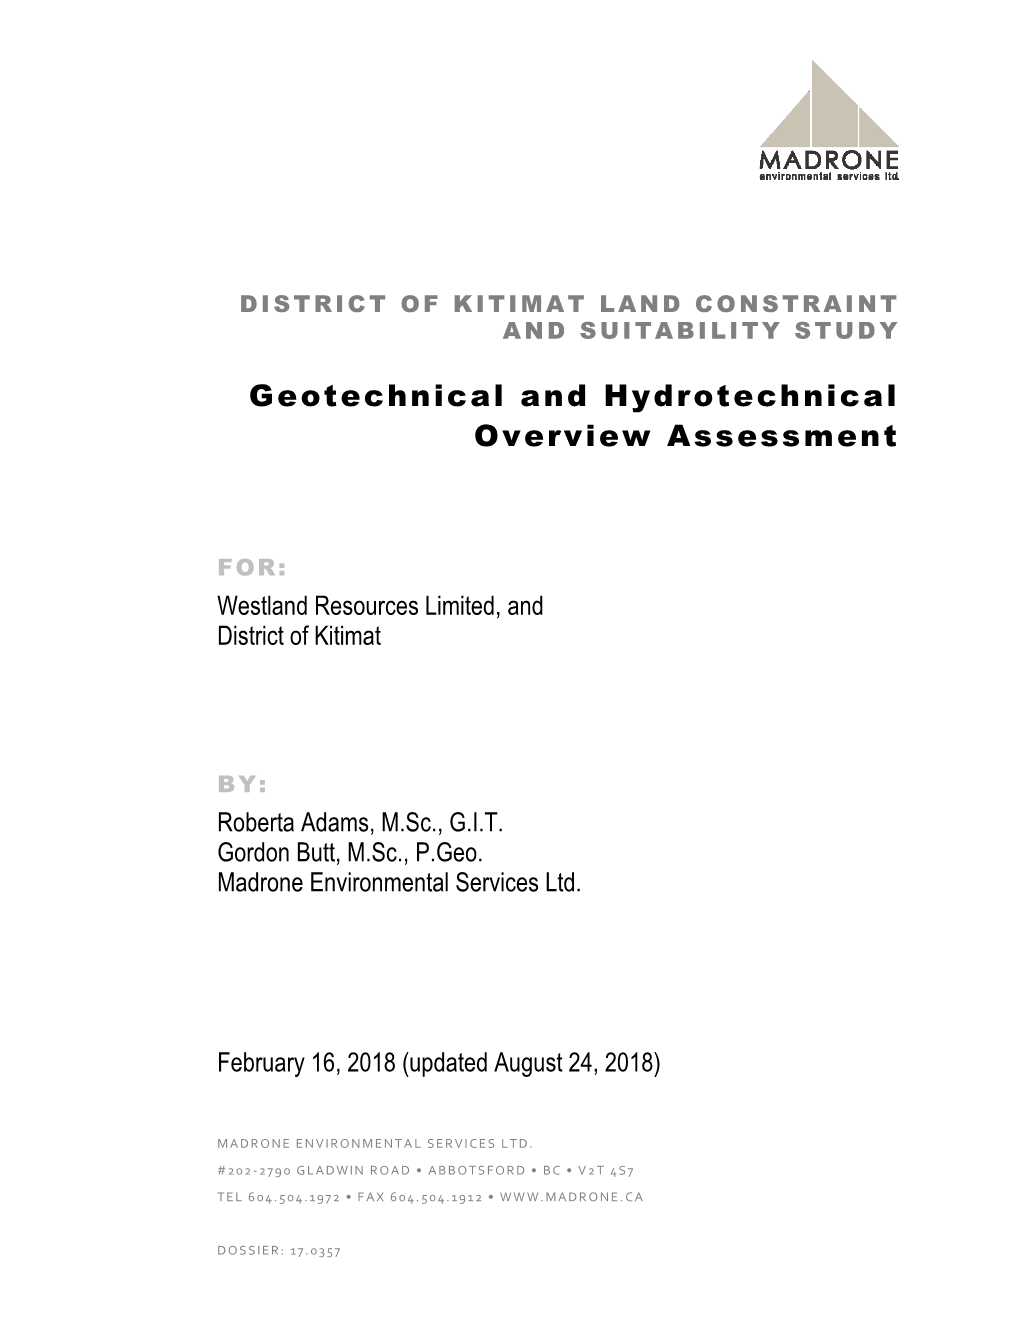 Geotechnical and Hydrotechnical Overview Assessment